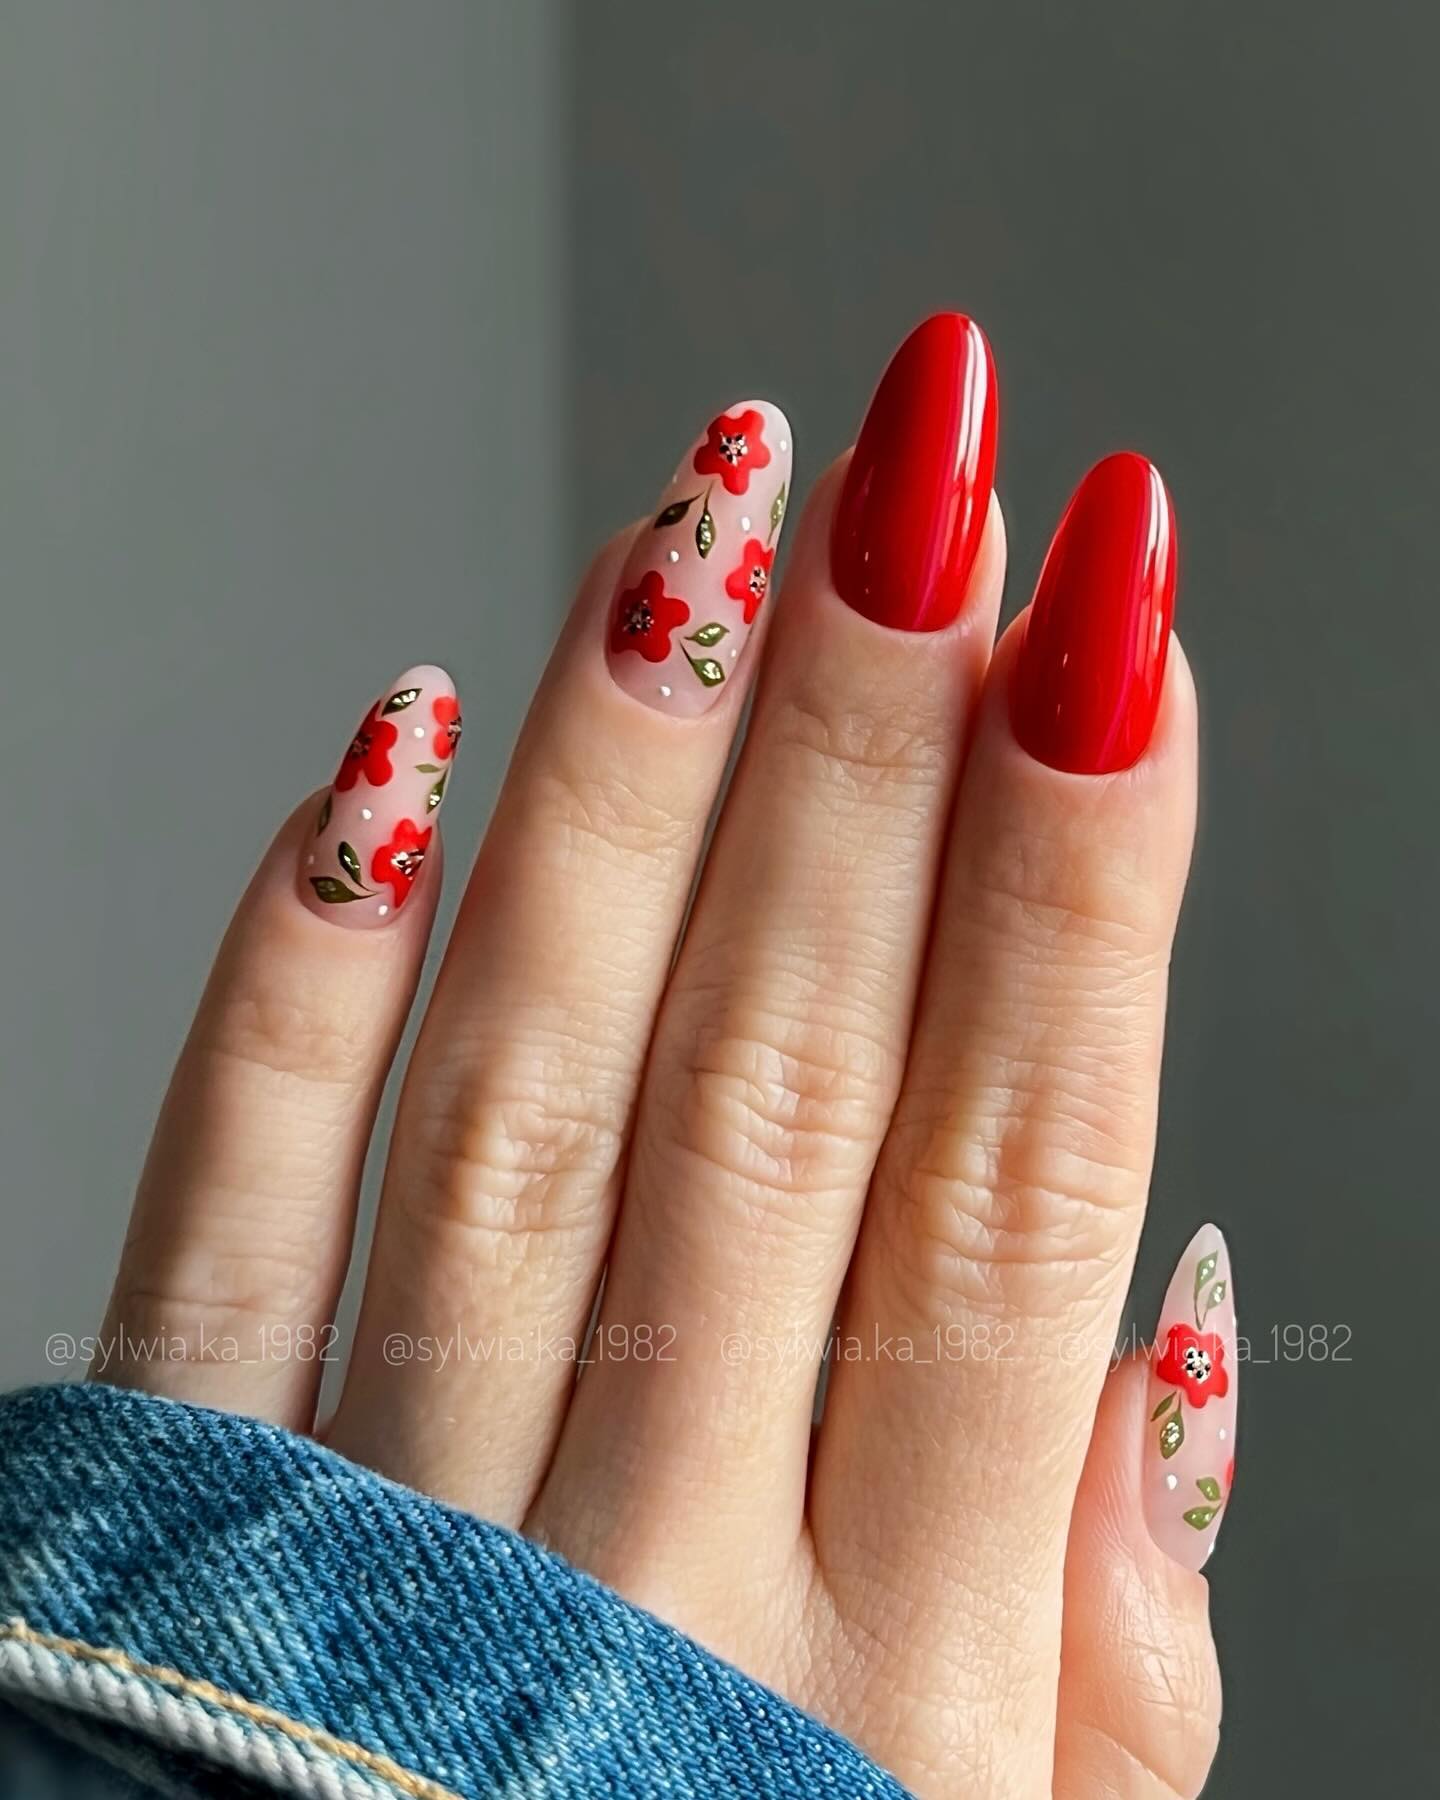 100 Pretty Spring Nail Designs To Try This Year images 103